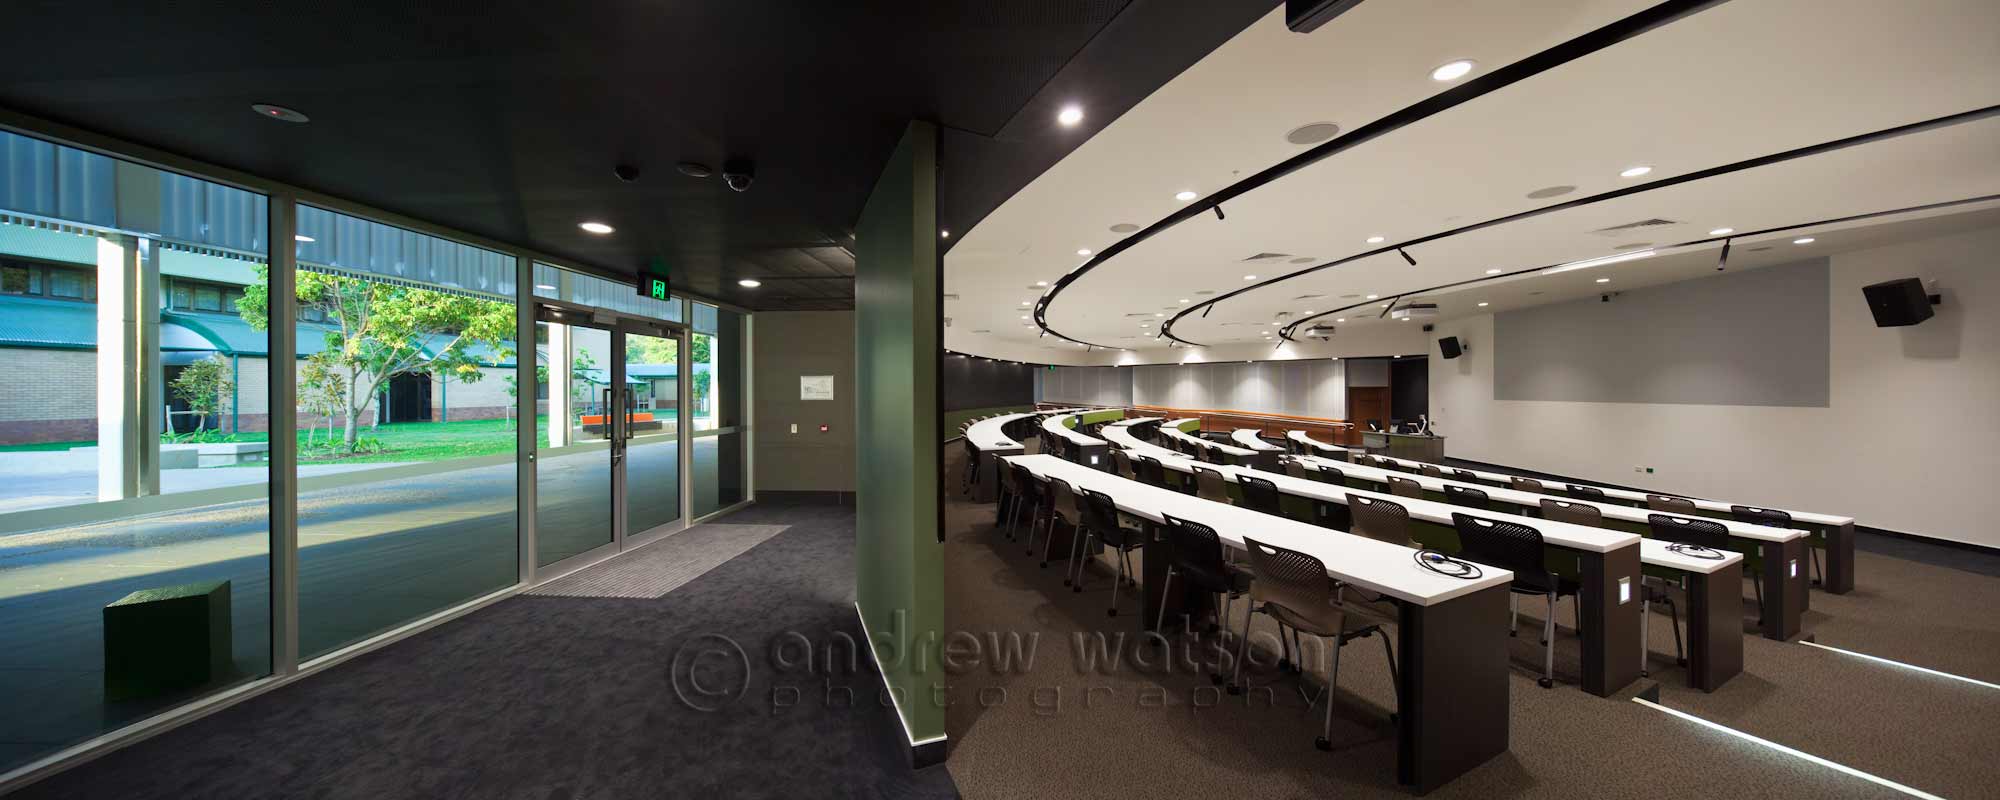 Architecture photography - Crowther Lecture Theatre at James Cook University, Cairns